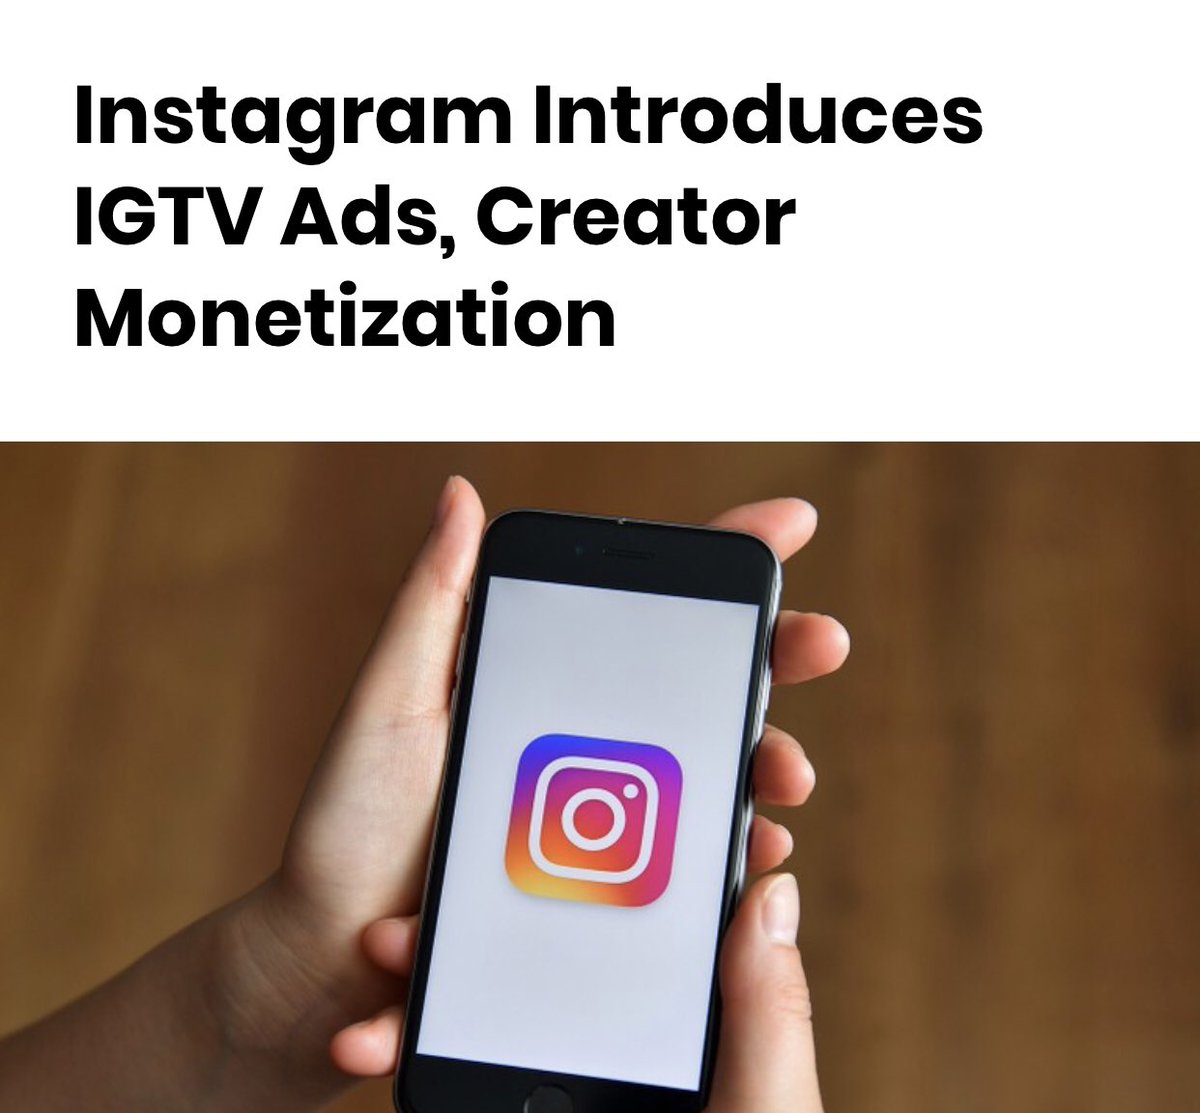 .  @instagram is finally starting the rollout of their monetization solution for creators. With the stay at home movement this was long overdue